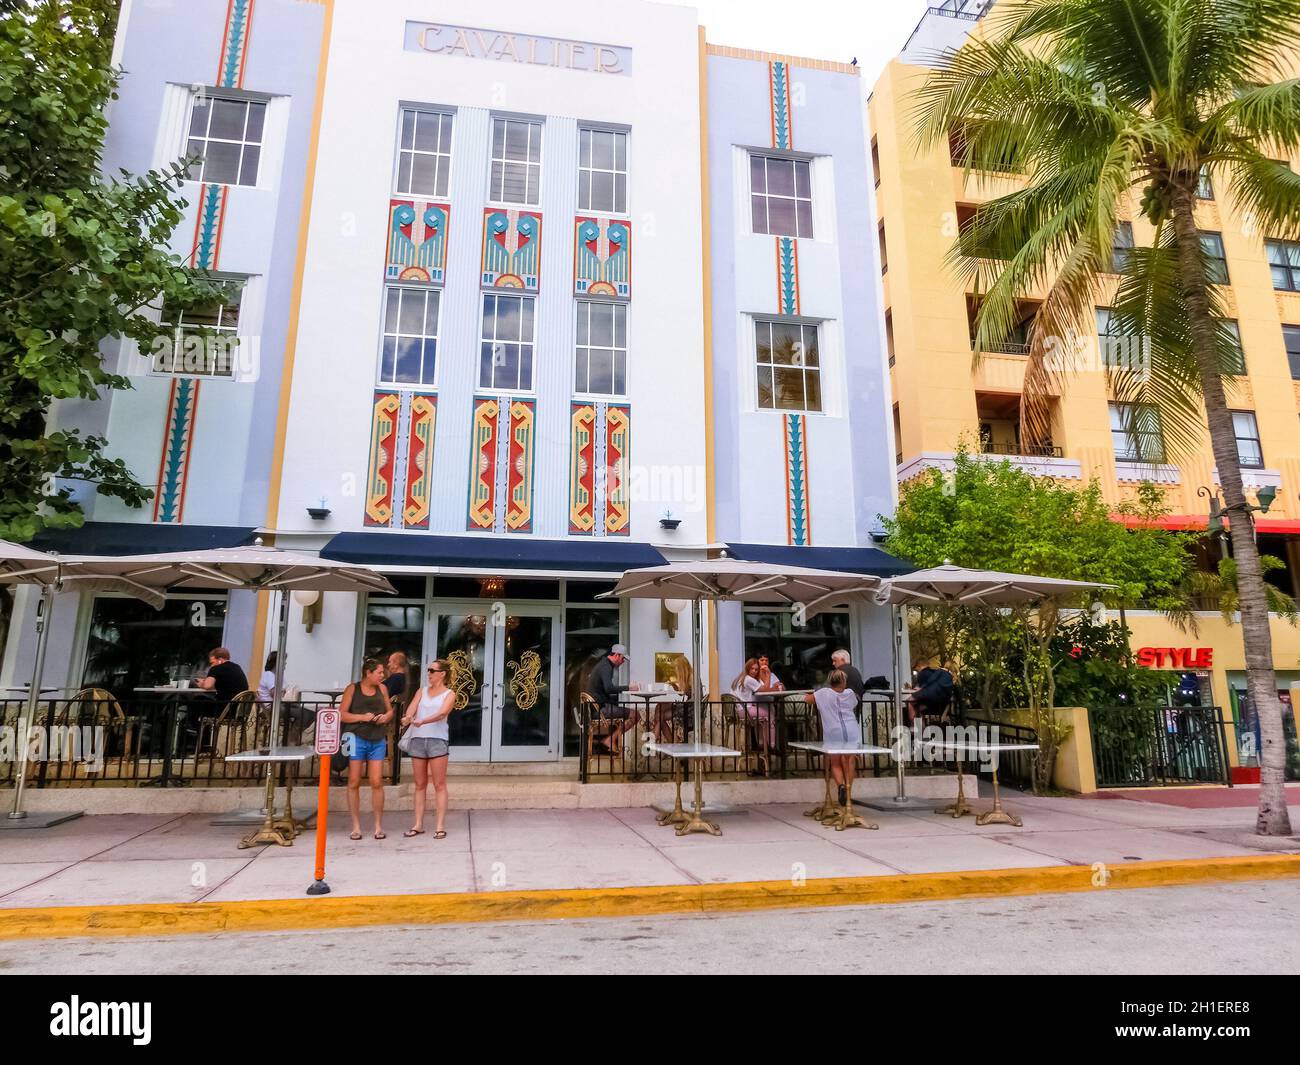 Miami, United States of America - November 30, 2019: Cavalier Hotel at Ocean drive in Miami Beach, Florida. Art Deco architecture in South Beach is on Stock Photo